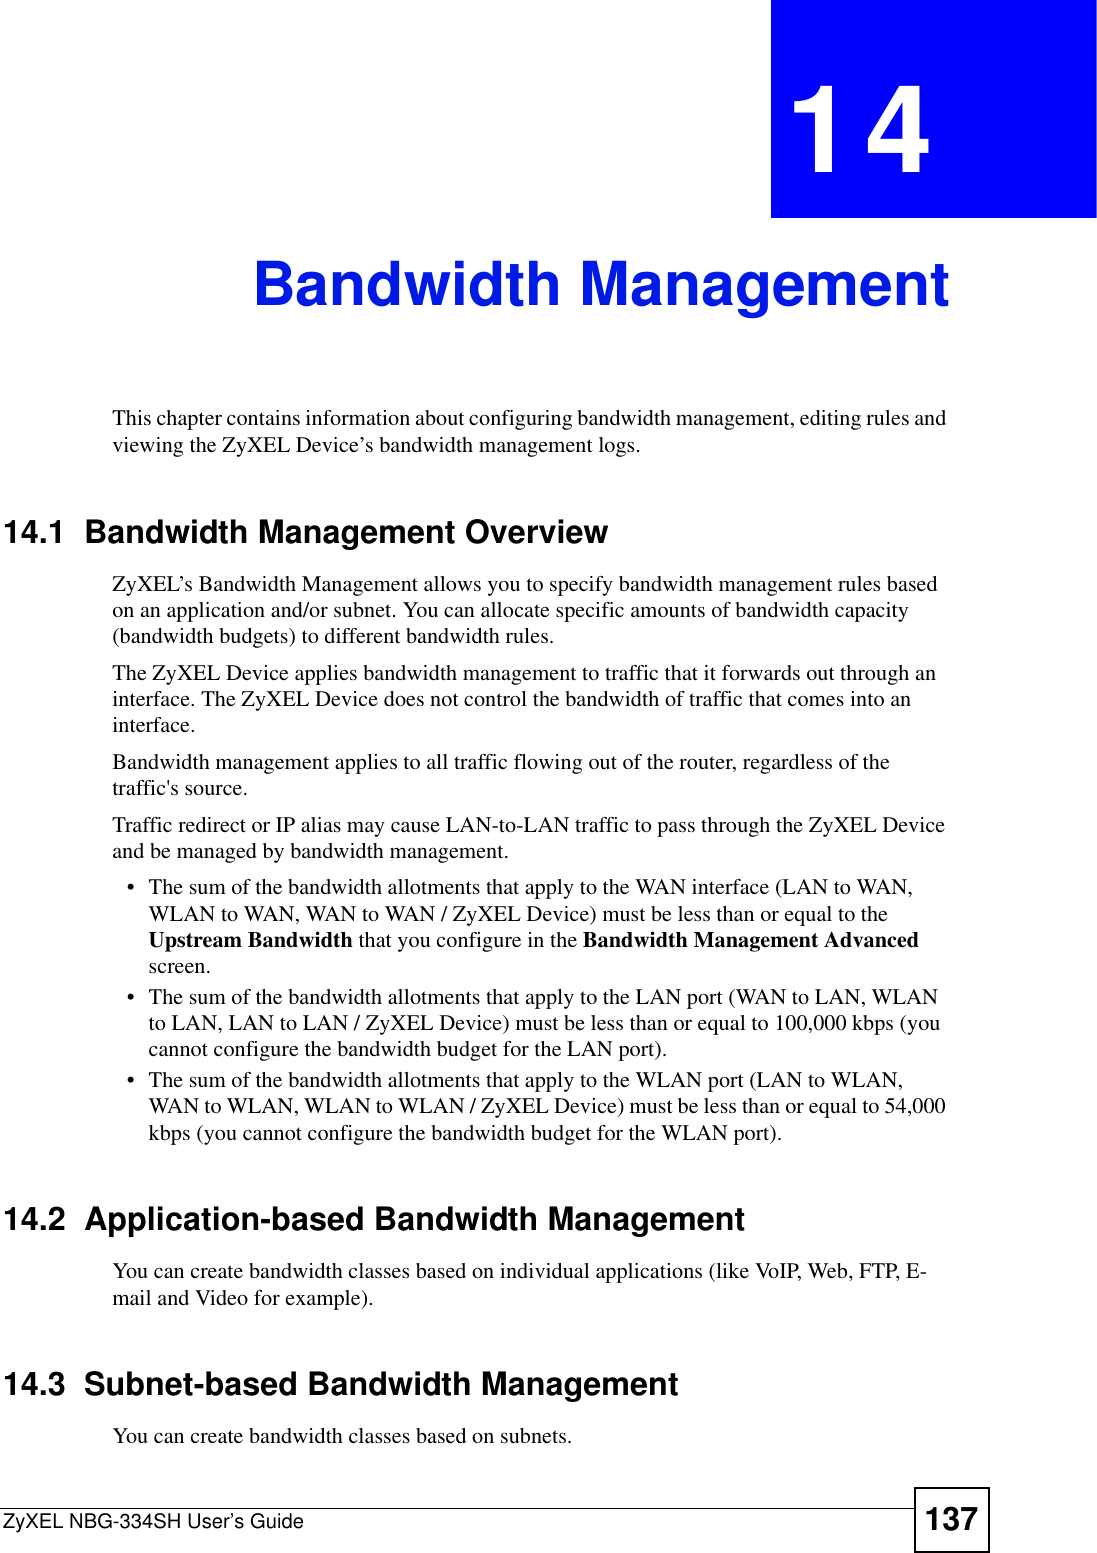 ZyXEL NBG-334SH User’s Guide 137CHAPTER 14Bandwidth ManagementThis chapter contains information about configuring bandwidth management, editing rules and viewing the ZyXEL Device’s bandwidth management logs.14.1  Bandwidth Management Overview ZyXEL’s Bandwidth Management allows you to specify bandwidth management rules based on an application and/or subnet. You can allocate specific amounts of bandwidth capacity (bandwidth budgets) to different bandwidth rules. The ZyXEL Device applies bandwidth management to traffic that it forwards out through an interface. The ZyXEL Device does not control the bandwidth of traffic that comes into an interface.Bandwidth management applies to all traffic flowing out of the router, regardless of the traffic&apos;s source.Traffic redirect or IP alias may cause LAN-to-LAN traffic to pass through the ZyXEL Device and be managed by bandwidth management. • The sum of the bandwidth allotments that apply to the WAN interface (LAN to WAN, WLAN to WAN, WAN to WAN / ZyXEL Device) must be less than or equal to the Upstream Bandwidth that you configure in the Bandwidth Management Advancedscreen. • The sum of the bandwidth allotments that apply to the LAN port (WAN to LAN, WLAN to LAN, LAN to LAN / ZyXEL Device) must be less than or equal to 100,000 kbps (you cannot configure the bandwidth budget for the LAN port). • The sum of the bandwidth allotments that apply to the WLAN port (LAN to WLAN, WAN to WLAN, WLAN to WLAN / ZyXEL Device) must be less than or equal to 54,000 kbps (you cannot configure the bandwidth budget for the WLAN port). 14.2  Application-based Bandwidth ManagementYou can create bandwidth classes based on individual applications (like VoIP, Web, FTP, E-mail and Video for example).14.3  Subnet-based Bandwidth ManagementYou can create bandwidth classes based on subnets.